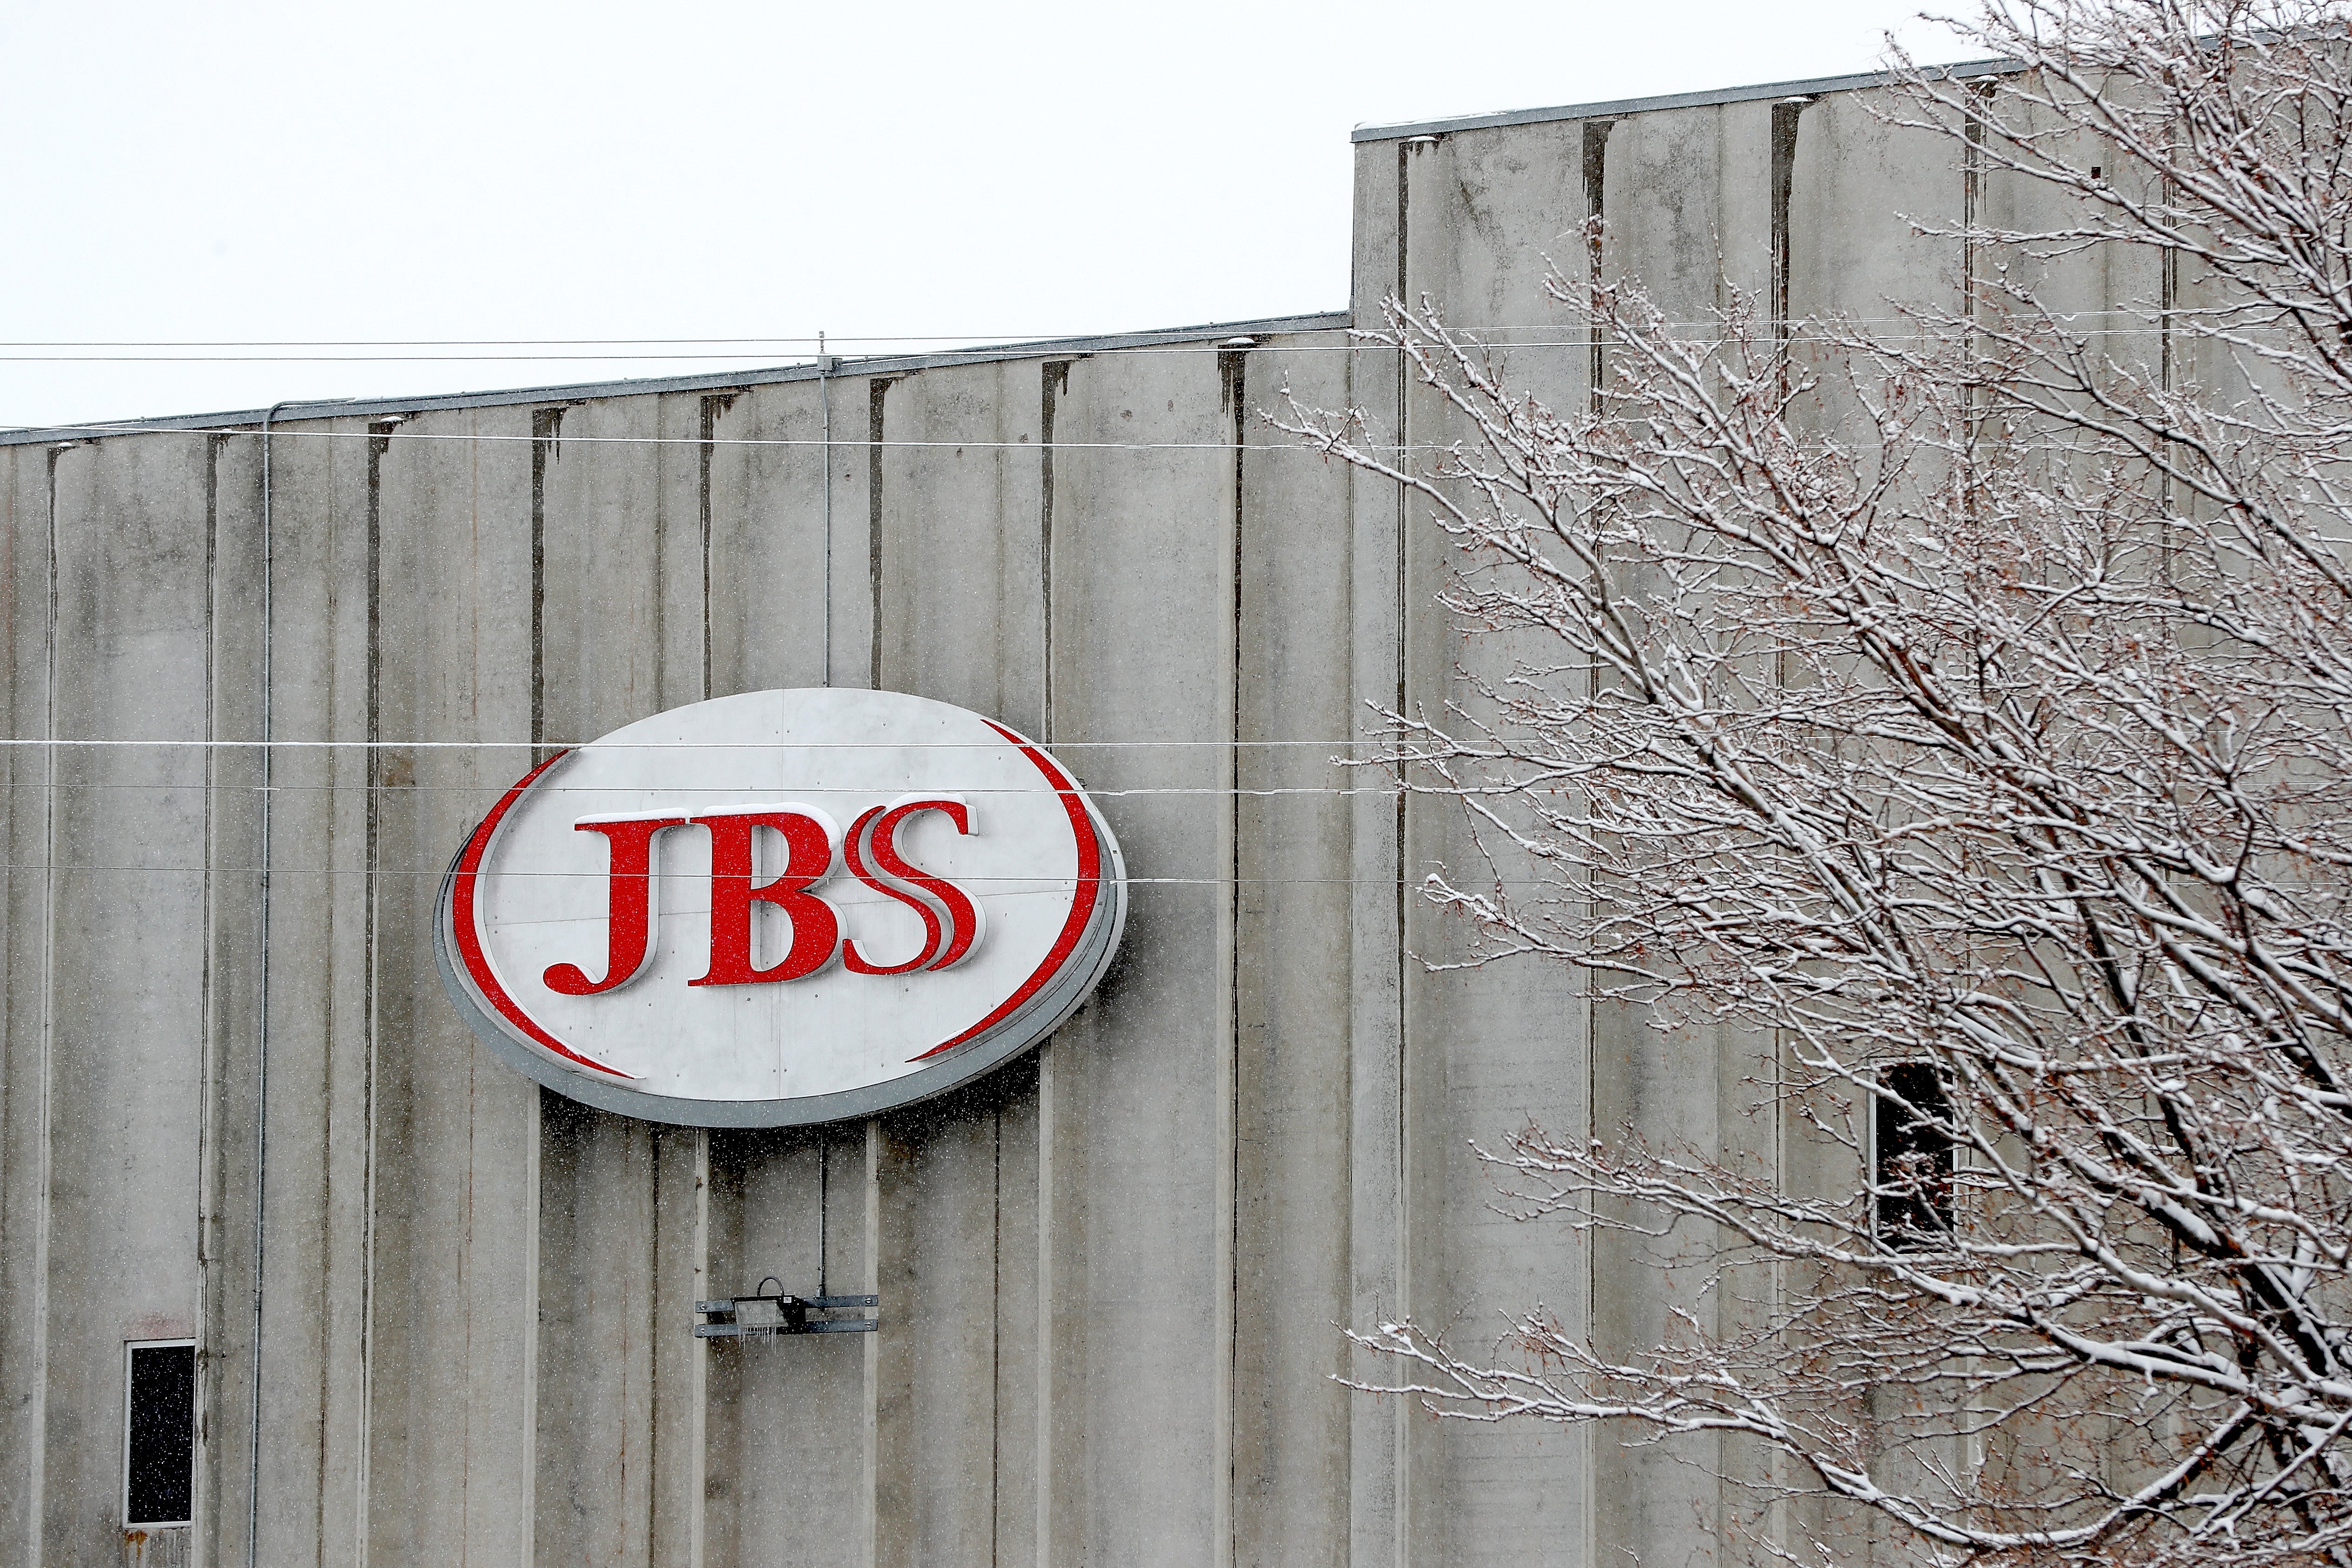 Global meat supplier JBS USA, which has headquarters in Colorado, said it was targeted in a cyberattack on 31 May.